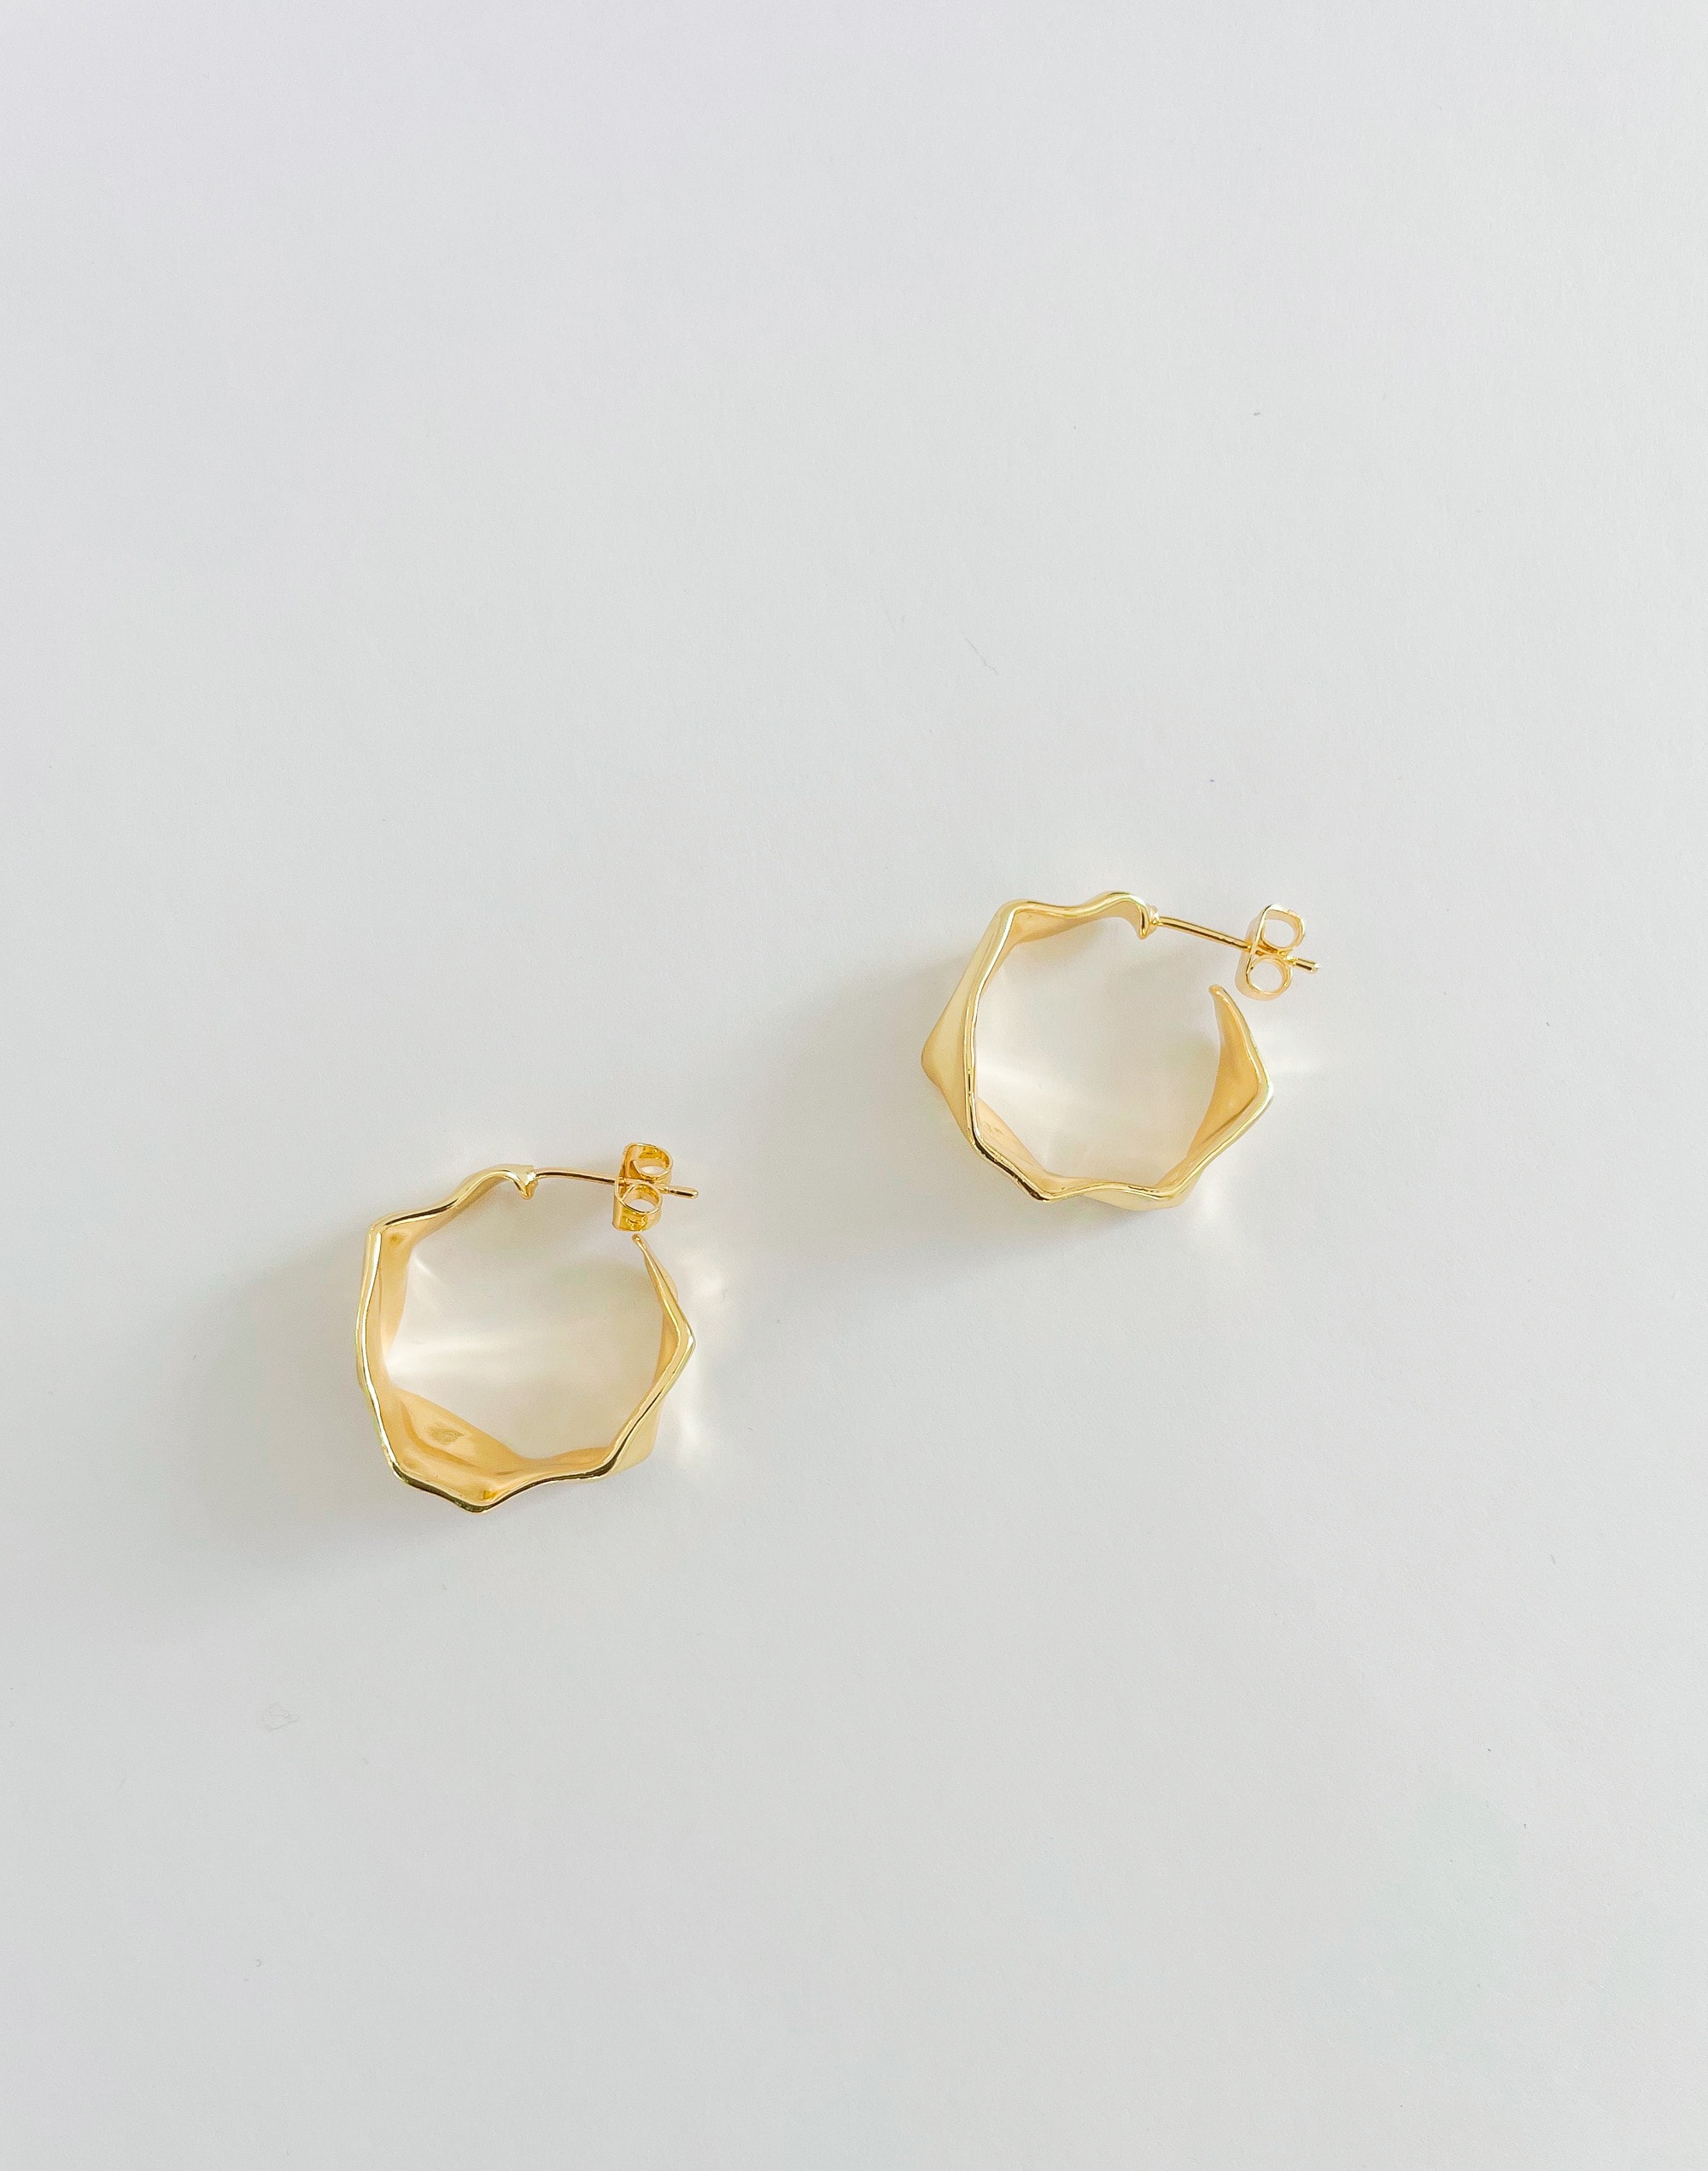 Abcrete & Co. The Wavy Hoops